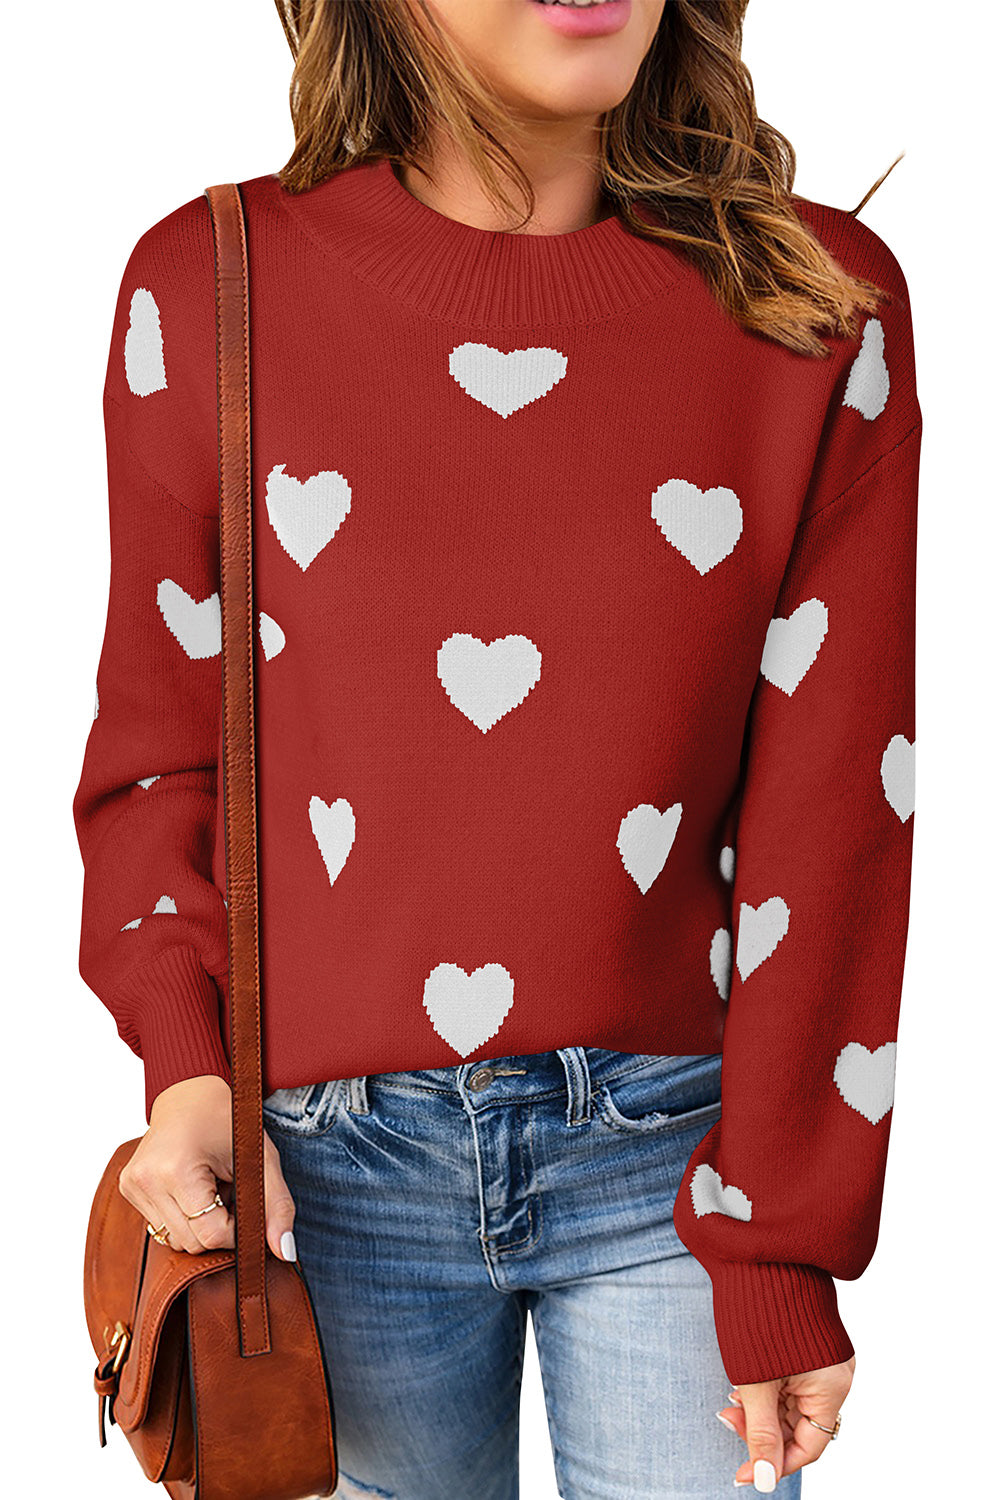 "Red Heart" Knit Sweater